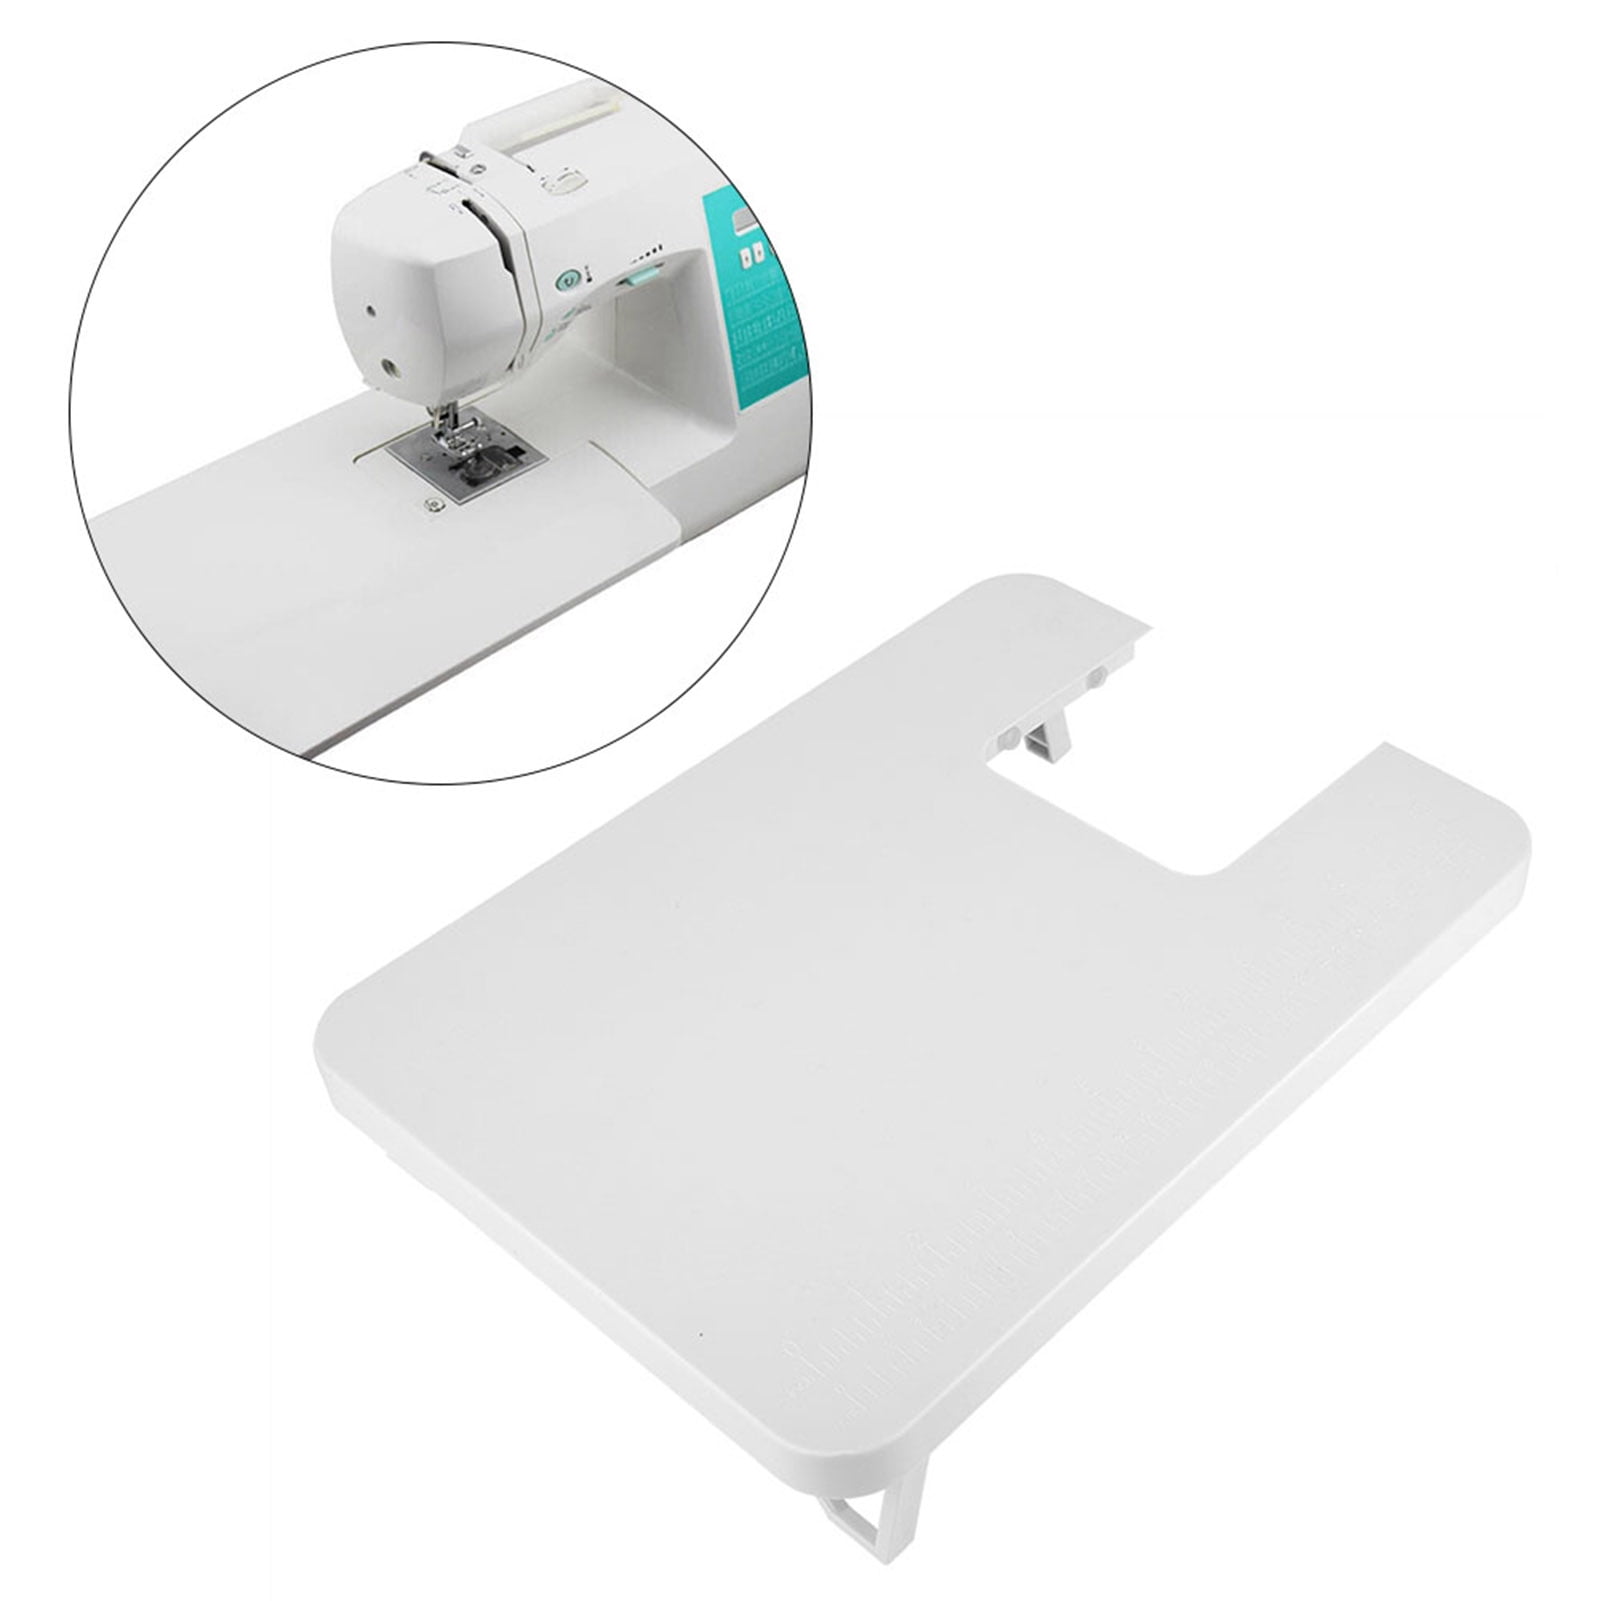 Loewten Extension Table, 35.5*25.3*2cm/13.9*9.9*0.78inch Sewing Machine  Table, Foldable Sewing Machine Extension Table For Beginners Tailor 